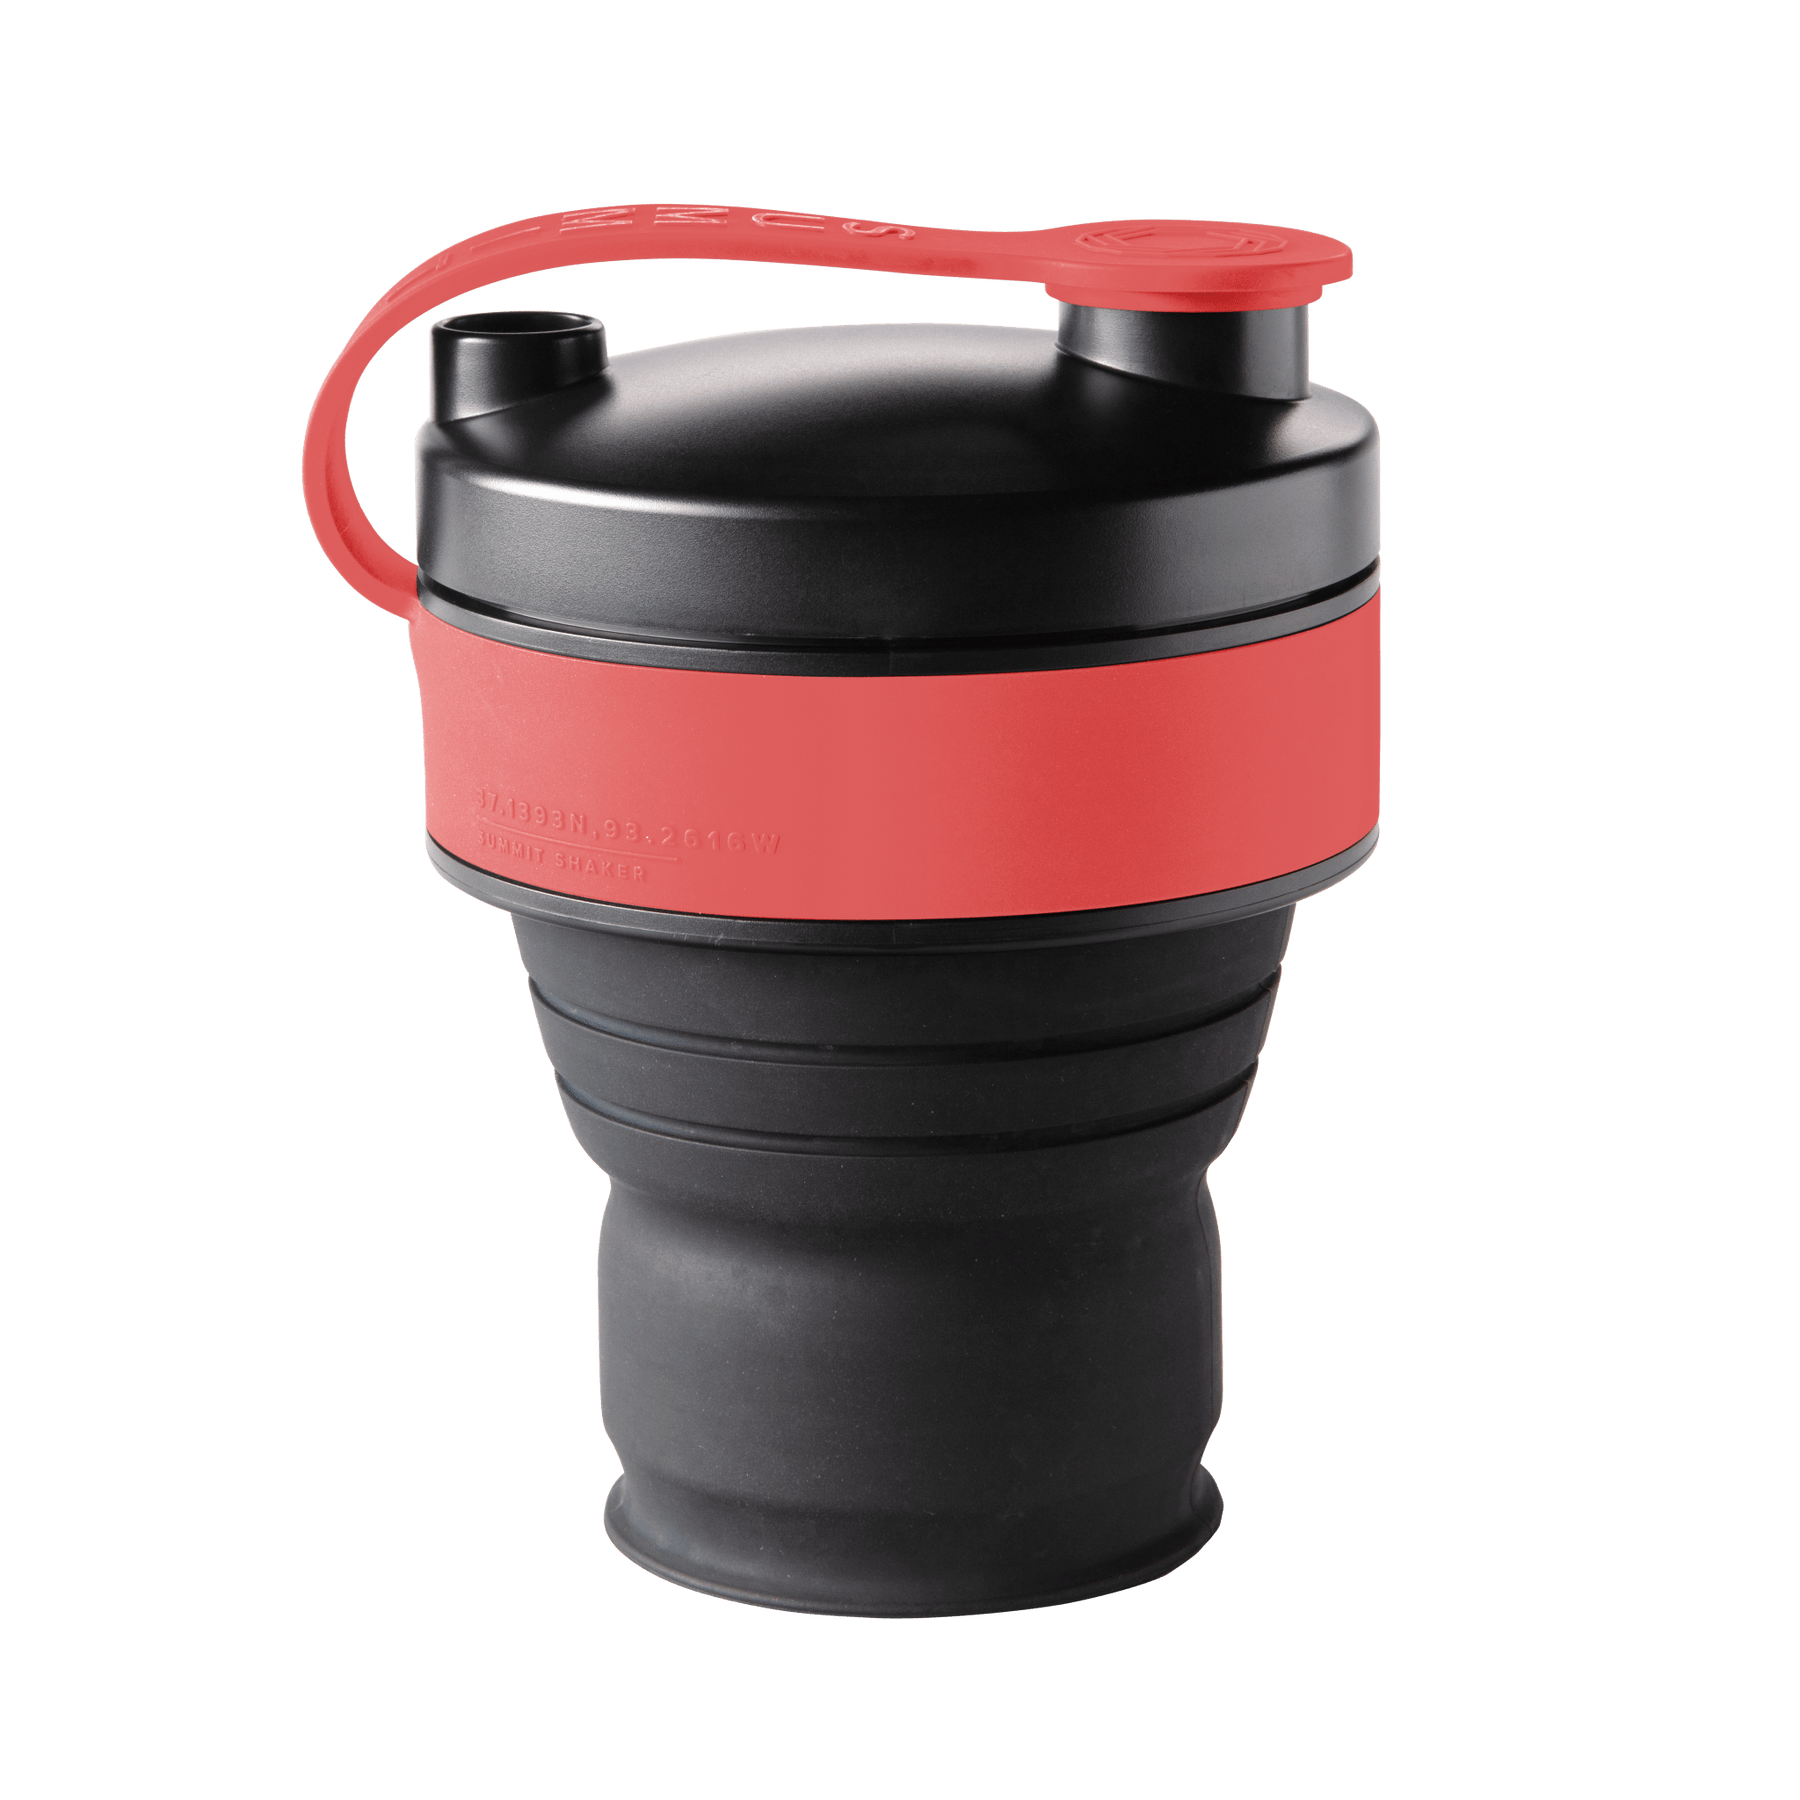 https://summitshaker.com/cdn/shop/products/summitshaker-shaker-coral-the-kilo-shaker-bottle-summit-shaker-protein-shaker-collapsible-silicone-bpa-free-28791398989939_1800x1800.png?v=1642386363